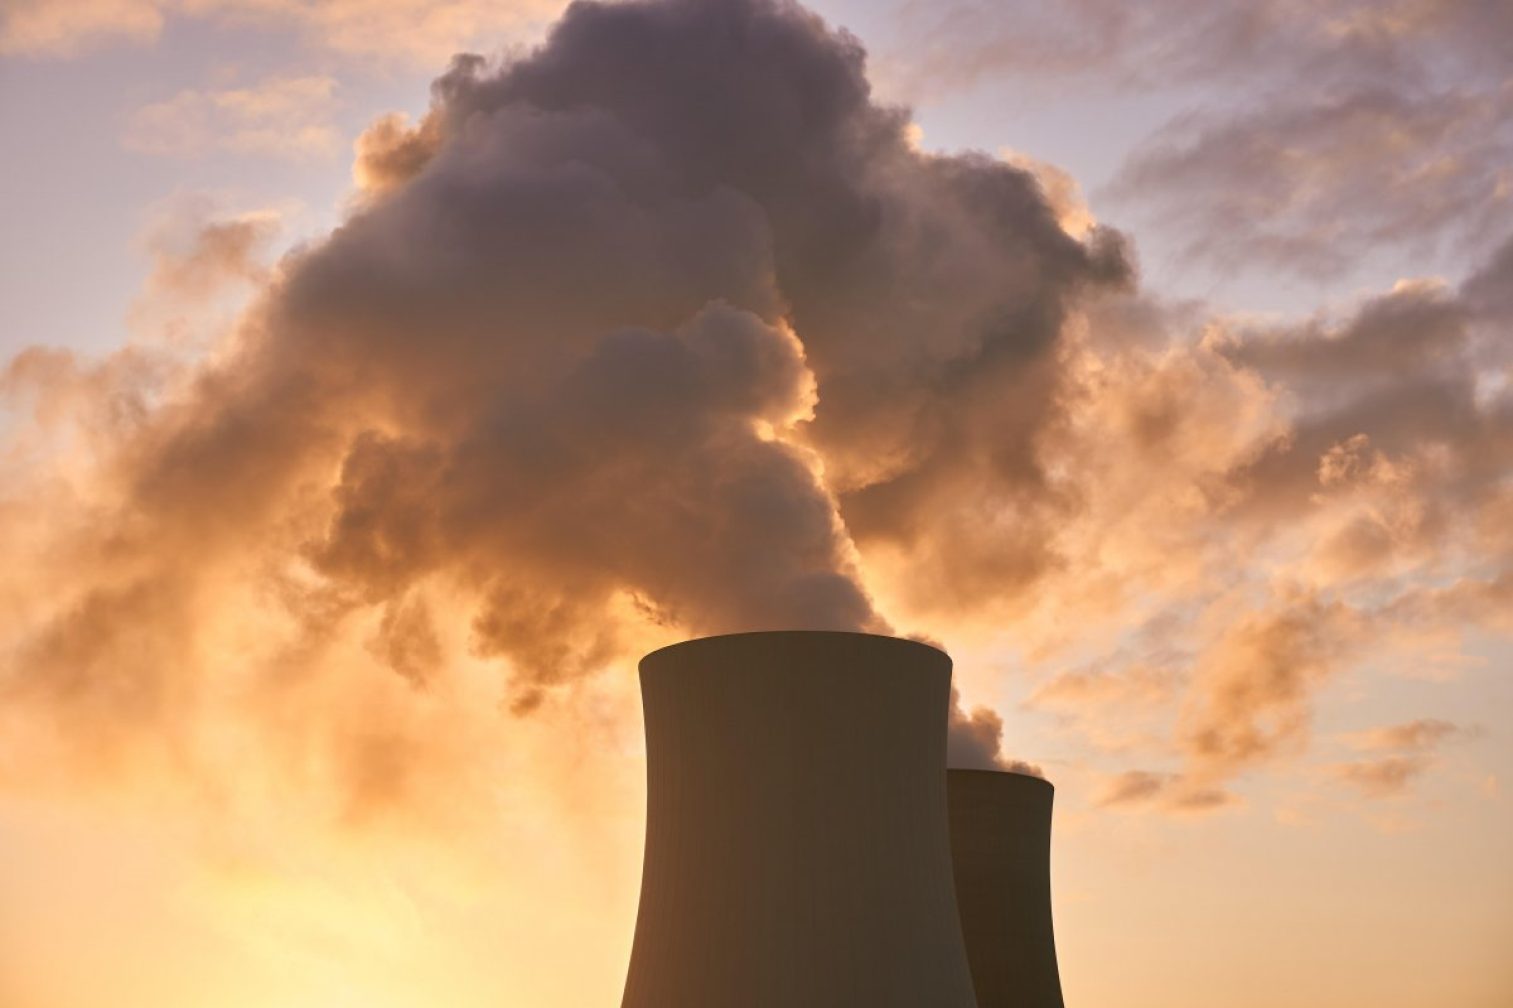 nuclear power plant, cooling tower, water vapor